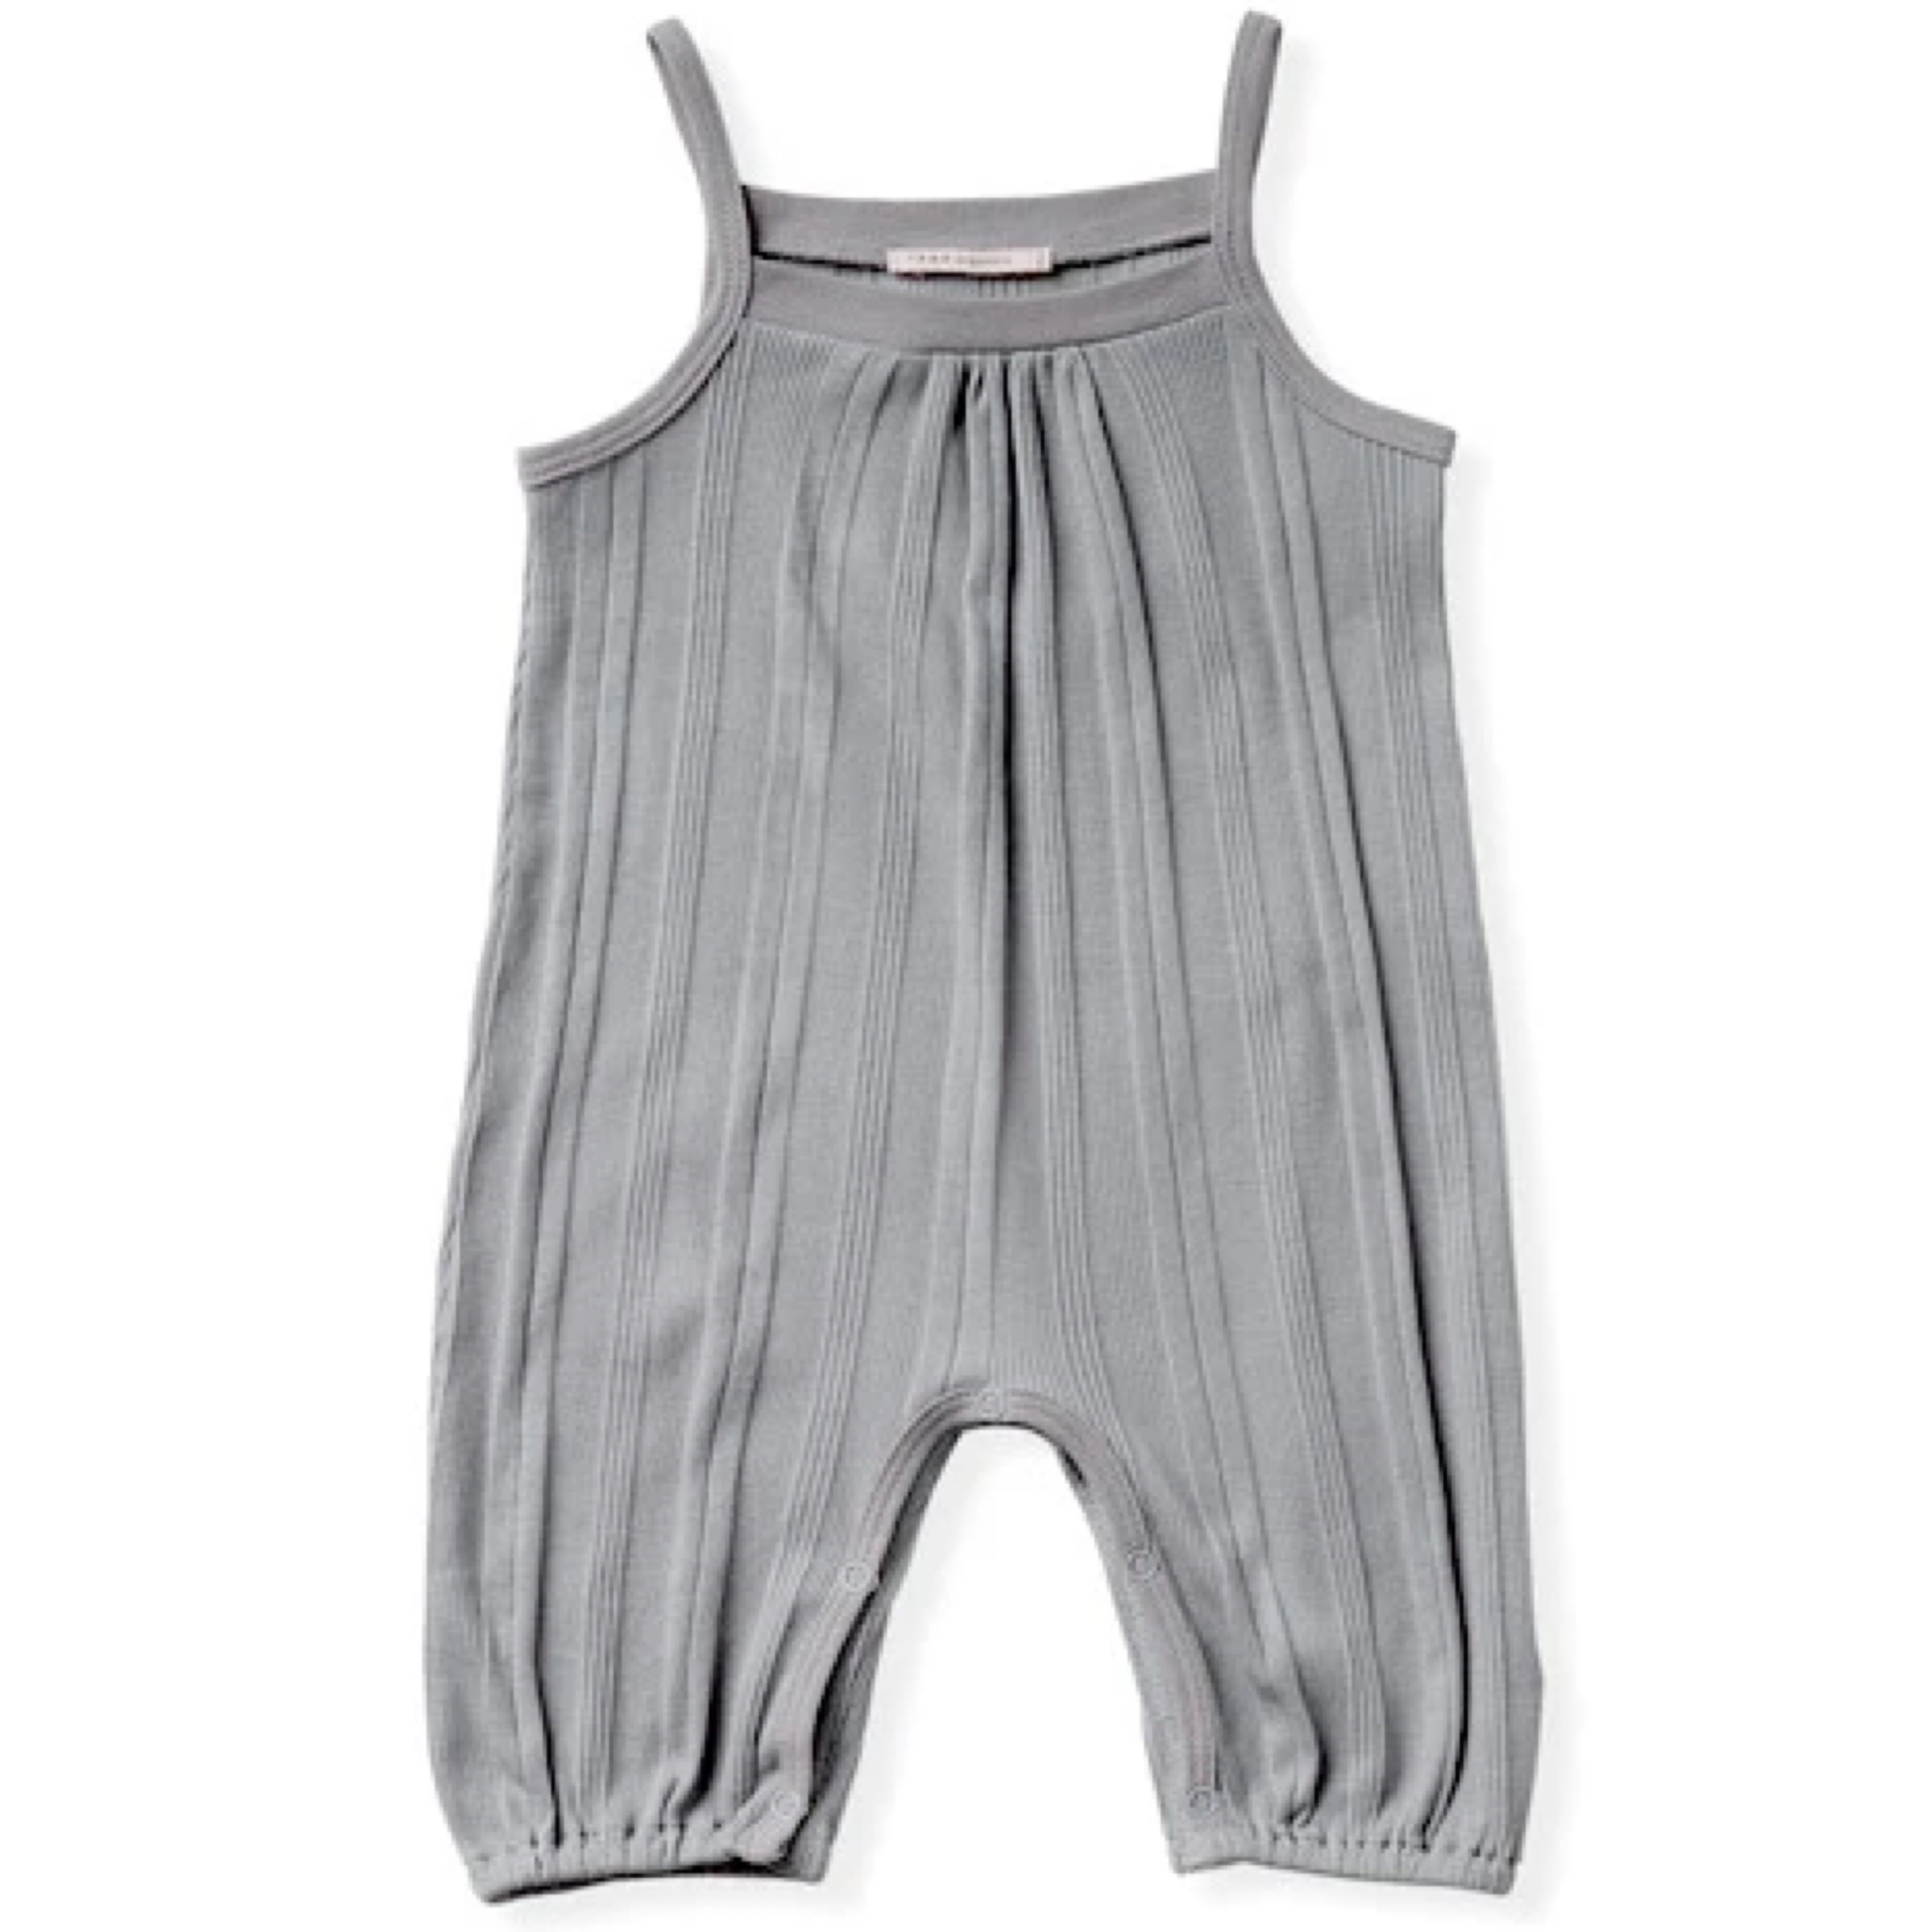 cool grey multi ribbed knit tank romper with elongated legs.  Soft self binding and shirring at neckline. 100% organic cotton ribbed knit.